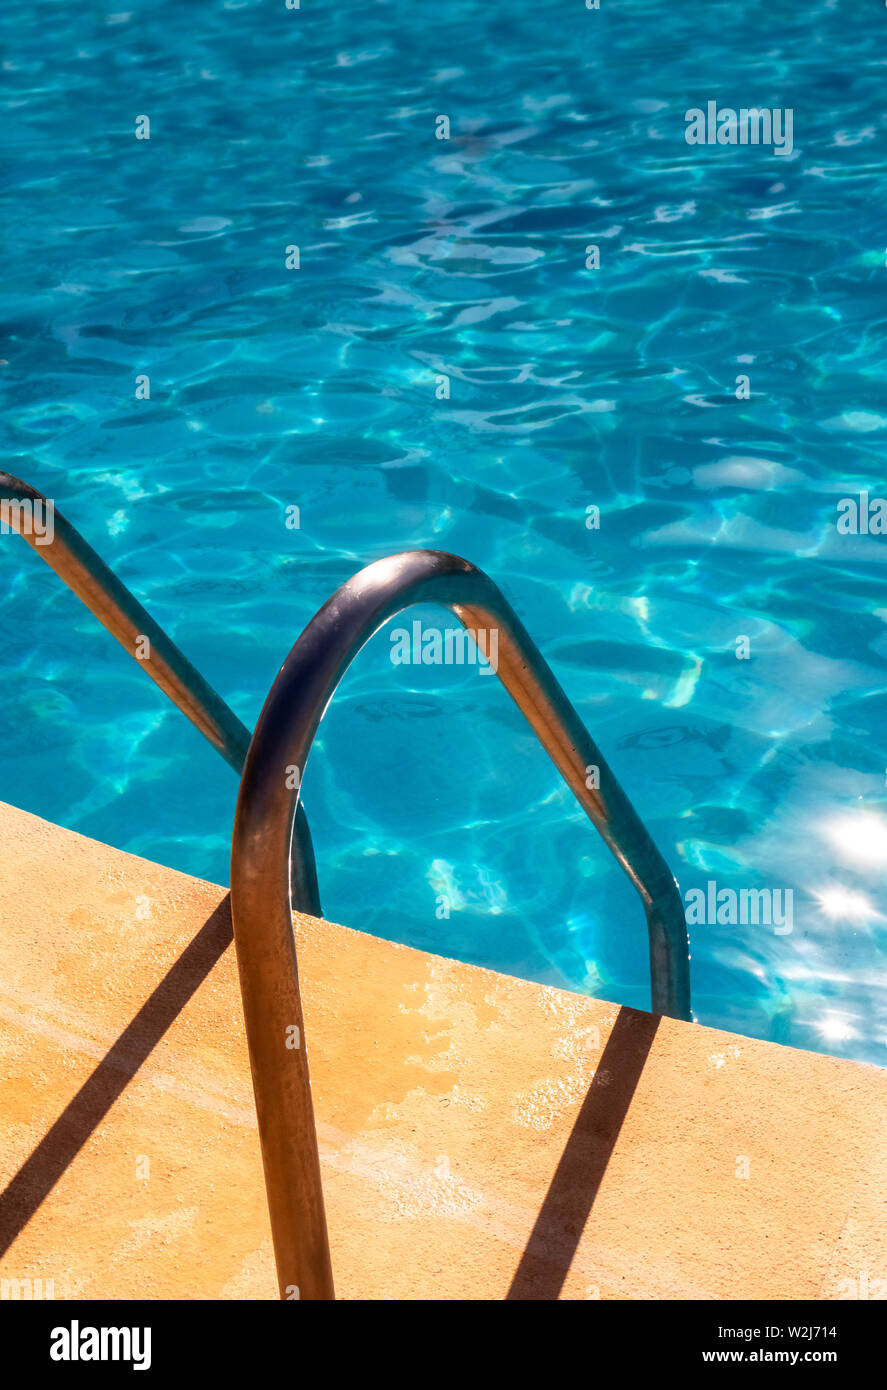 Entry into a swimming pool with grab handles Stock Photo